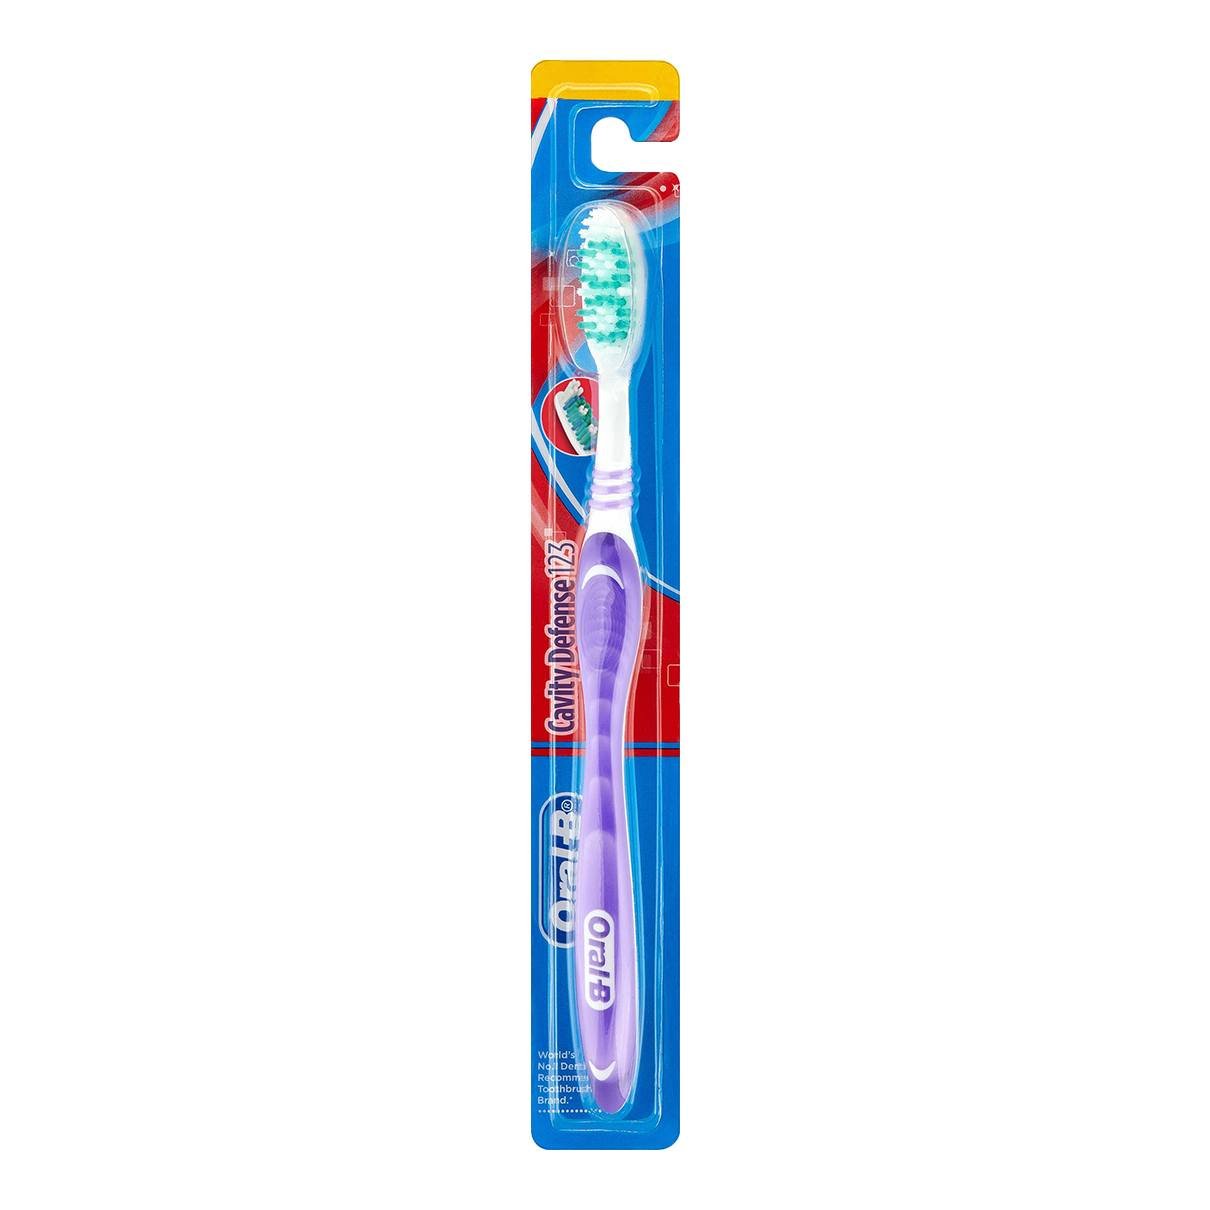 Oral-B Cavity Defense Dual Cleaning Toothbrush